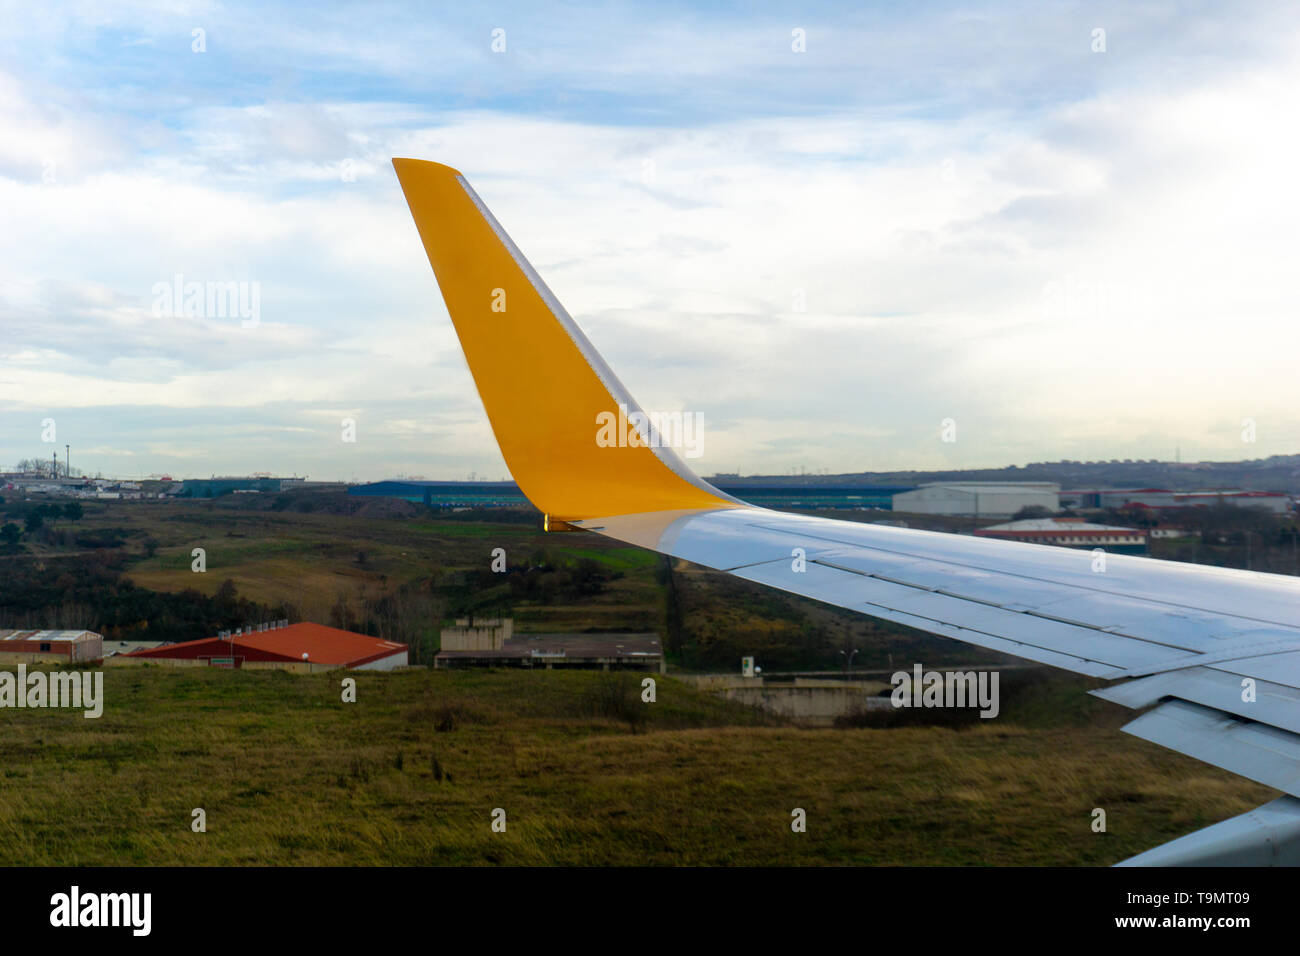 Green grassland seen through window of an taxiing aircraft, airplane wing from window. Stock Photo